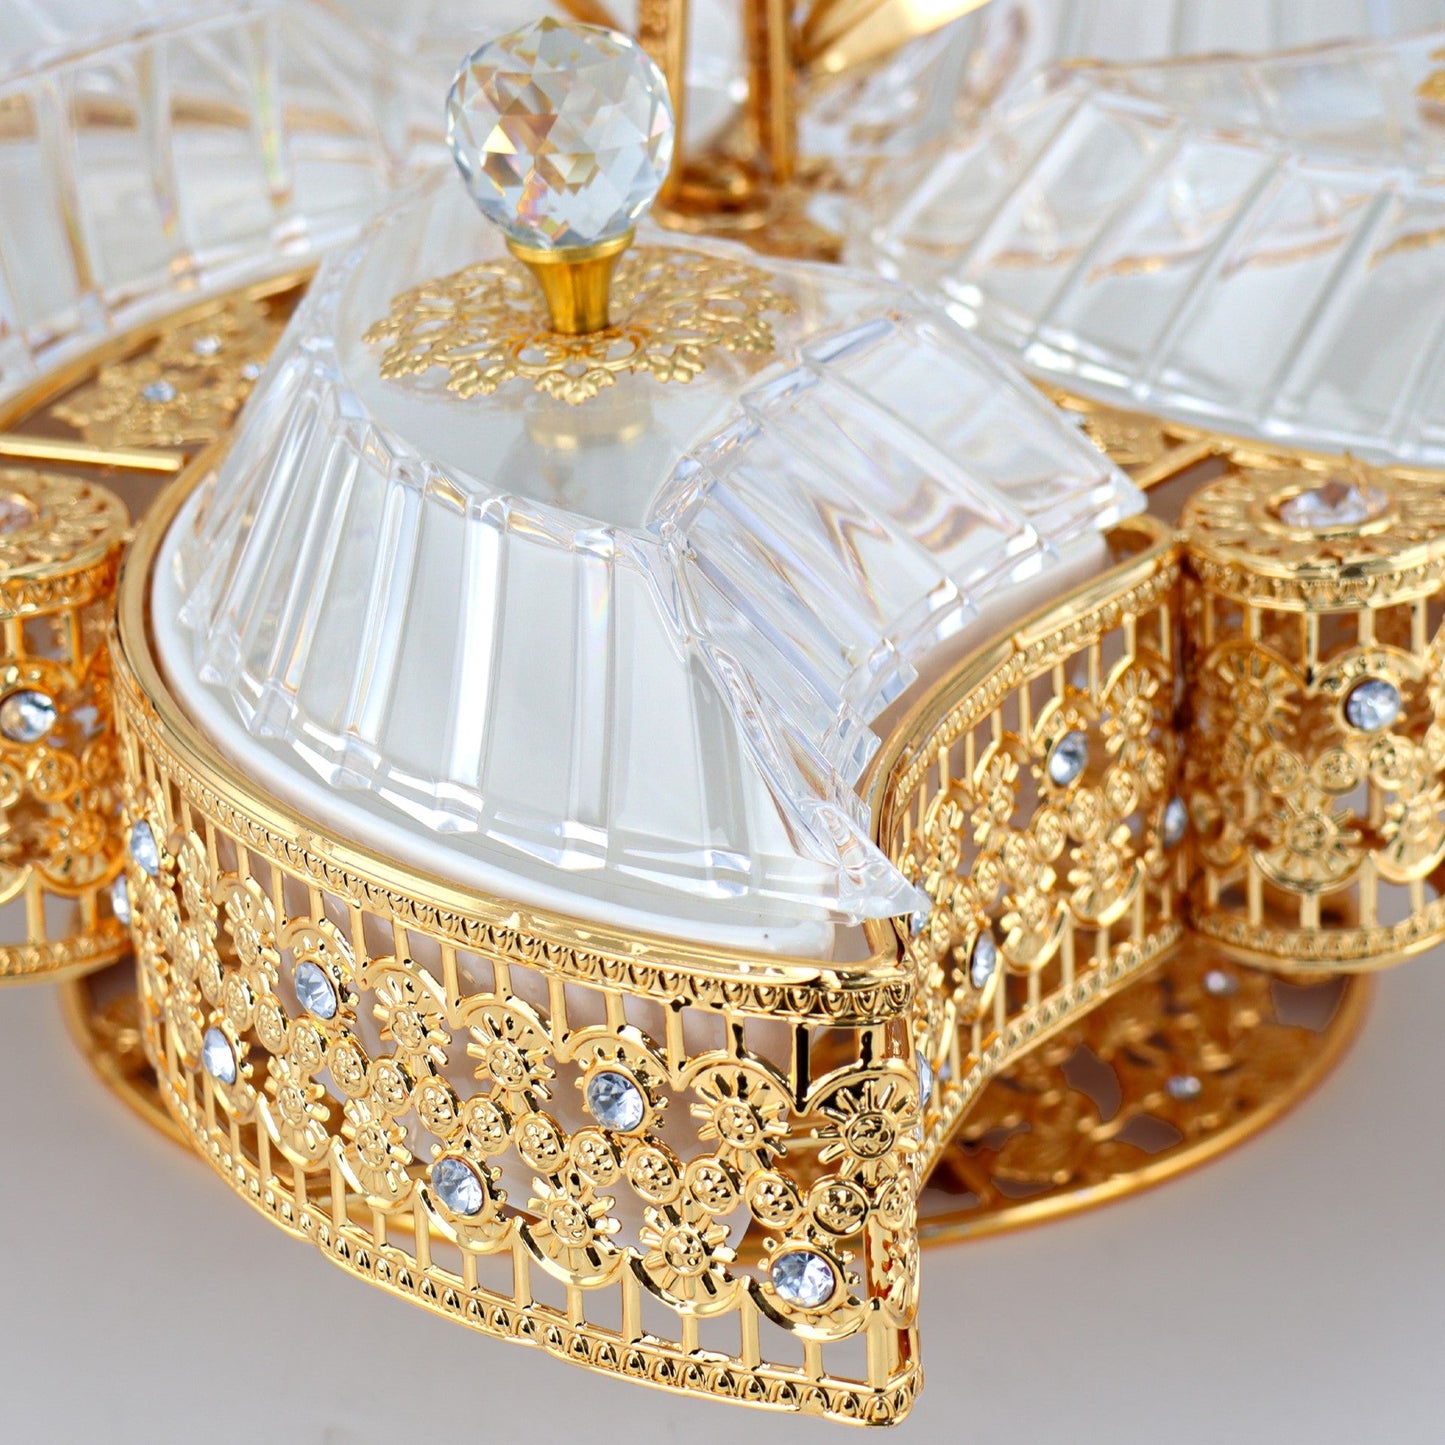 Durane Metal / Plastic Ornate Party Serving Tray Gold E0483-C Clamshell 55 x 46 cm 10679 (Big Parcel Rate)